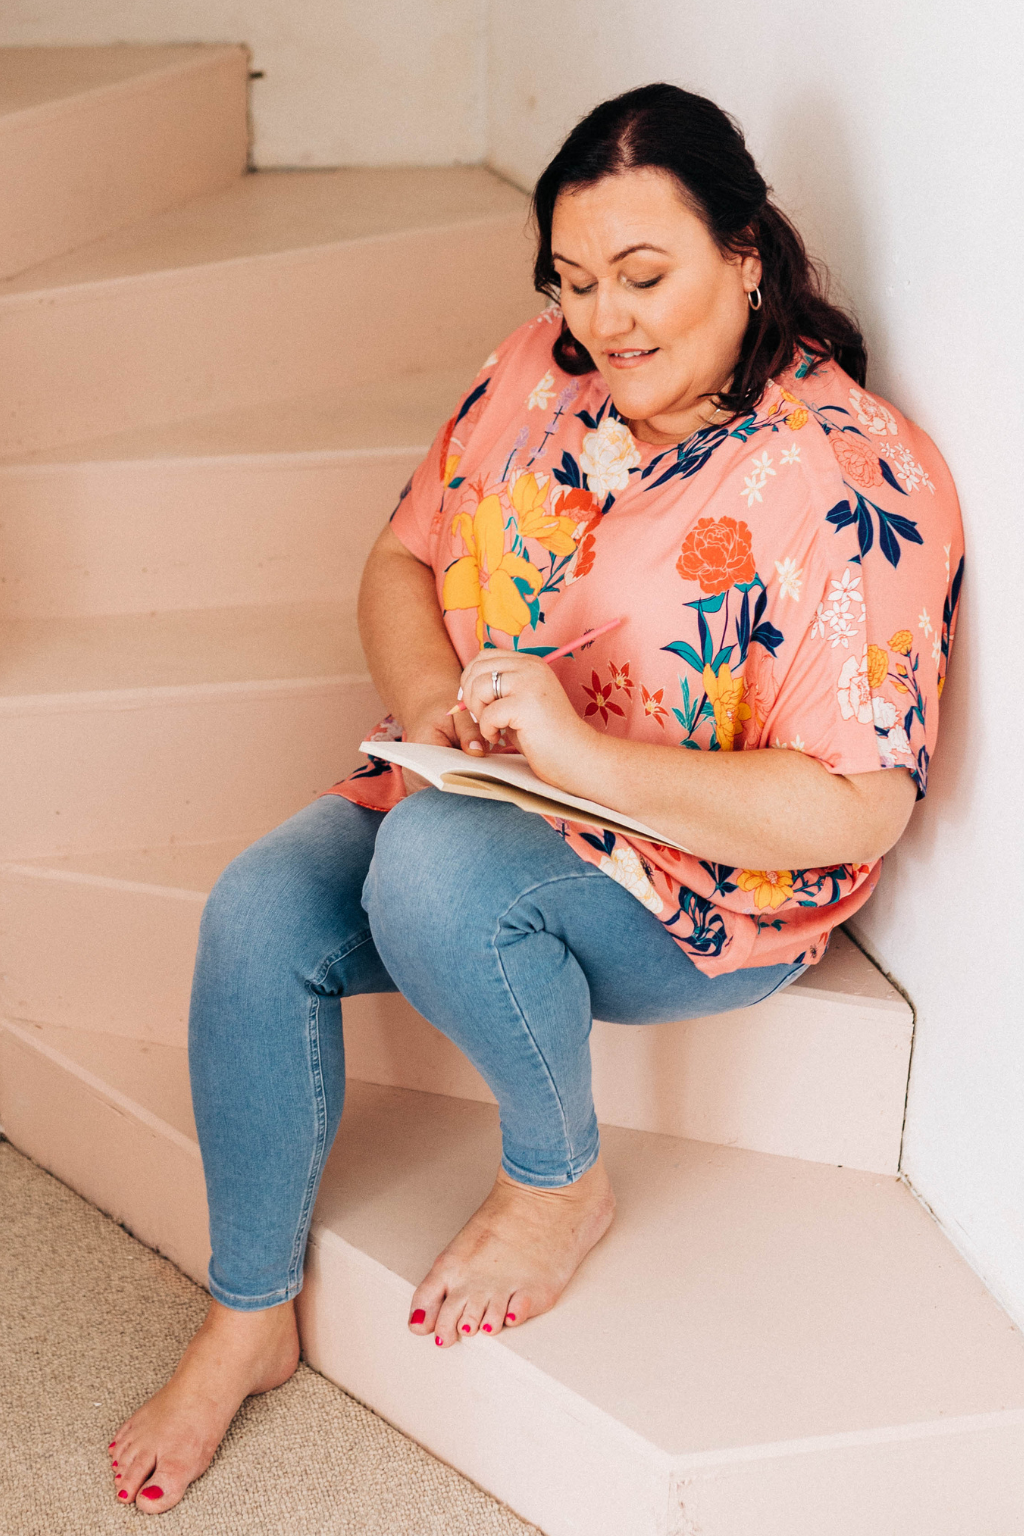 woman wearing pink floral adaptive top and jeans sitting writing in her journal